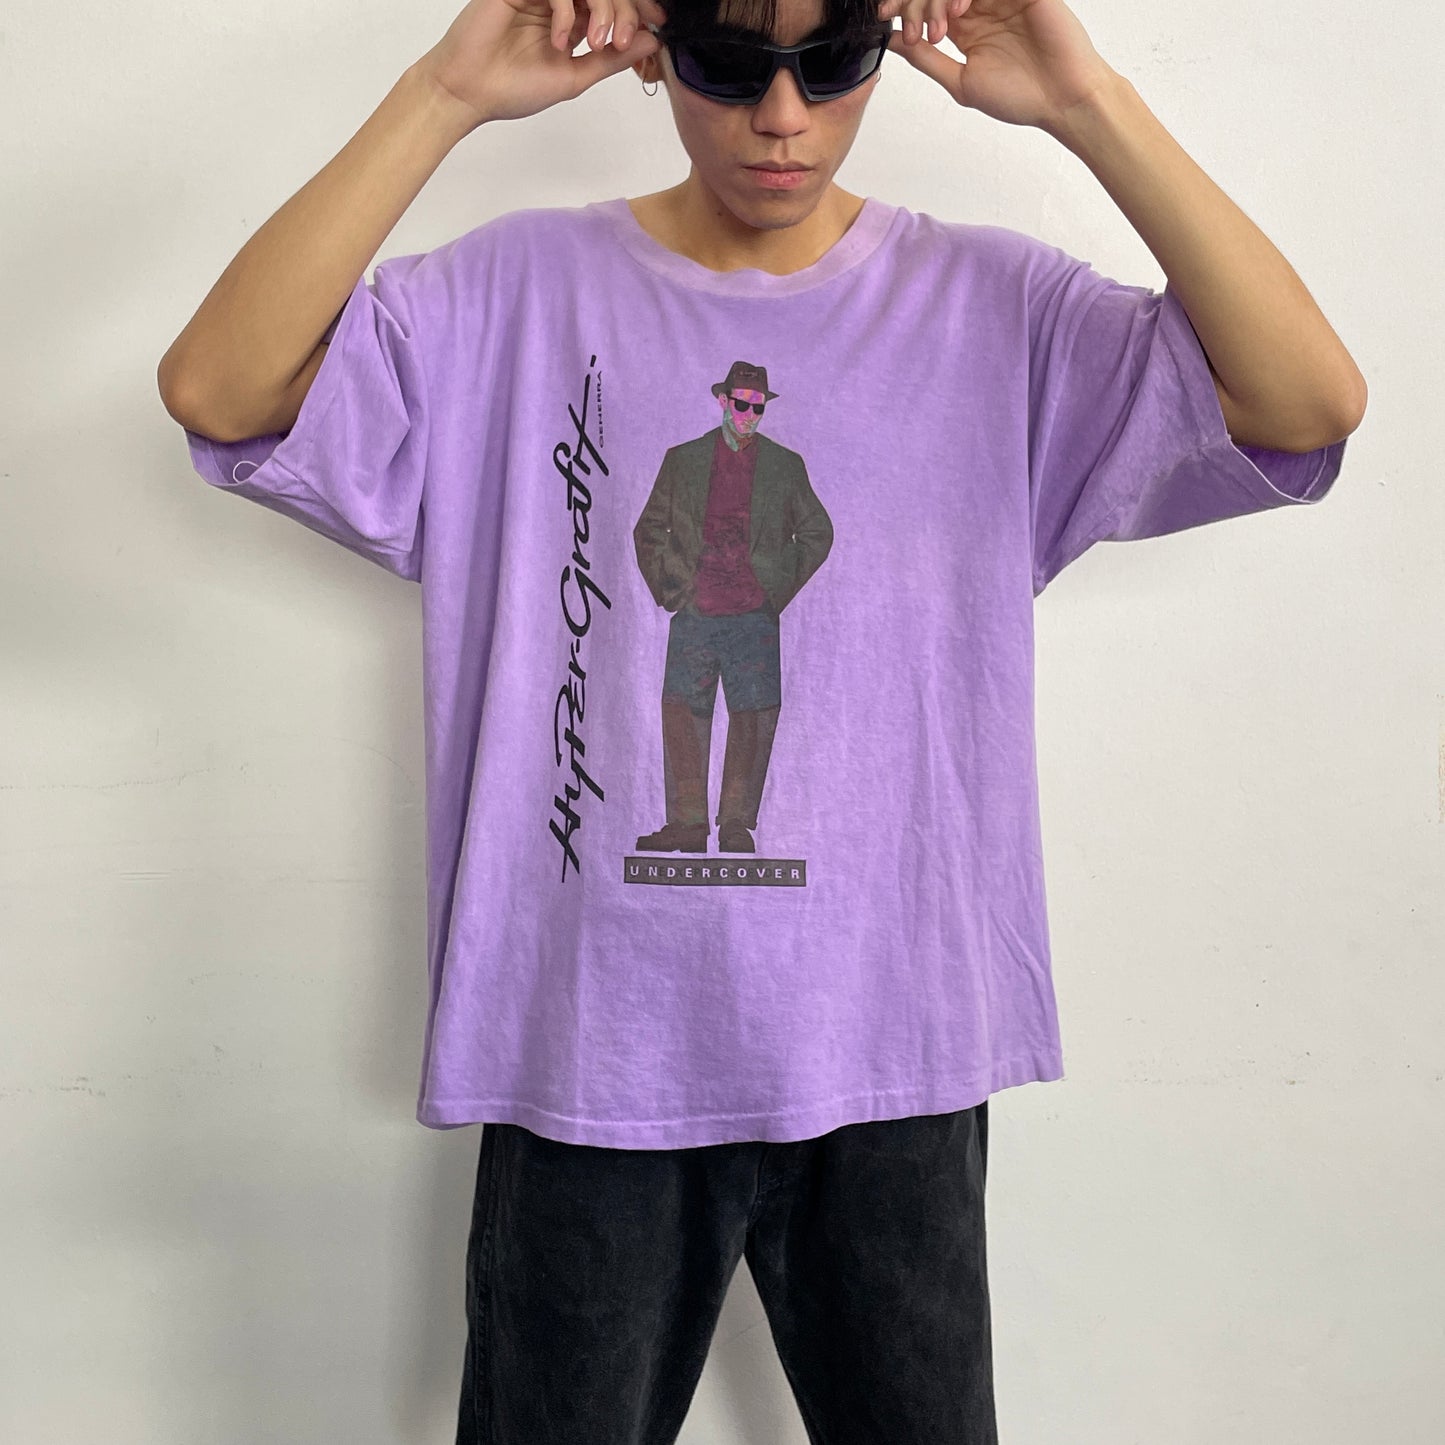 Vintage Undercover Tee (XL) Color Change on heat